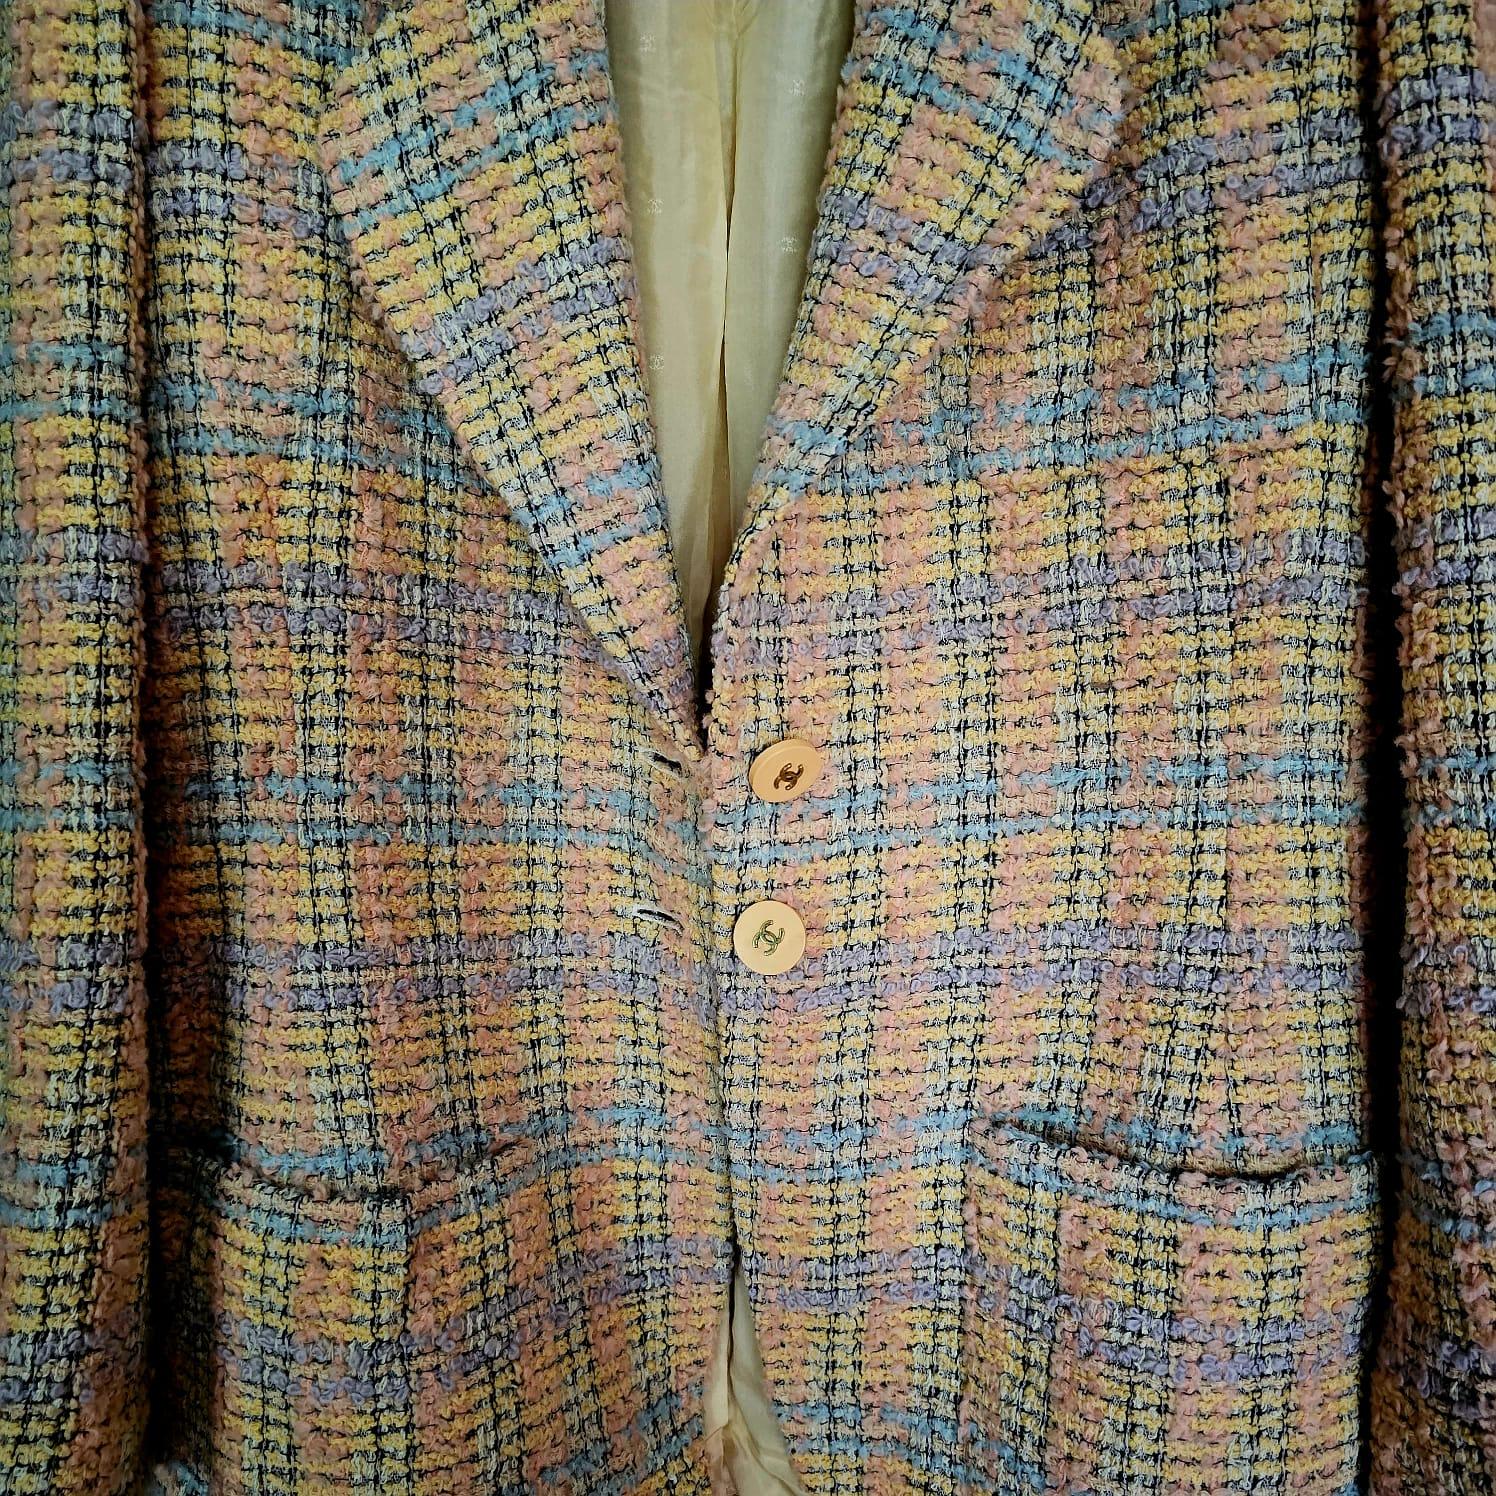 The iconic tweed jacket from 1994 collection. Beautiful condition overall, light yellowing on the lining due to age. Faint pulling on the tweed surface but nothing major. Comes as it is. Size FR 44.